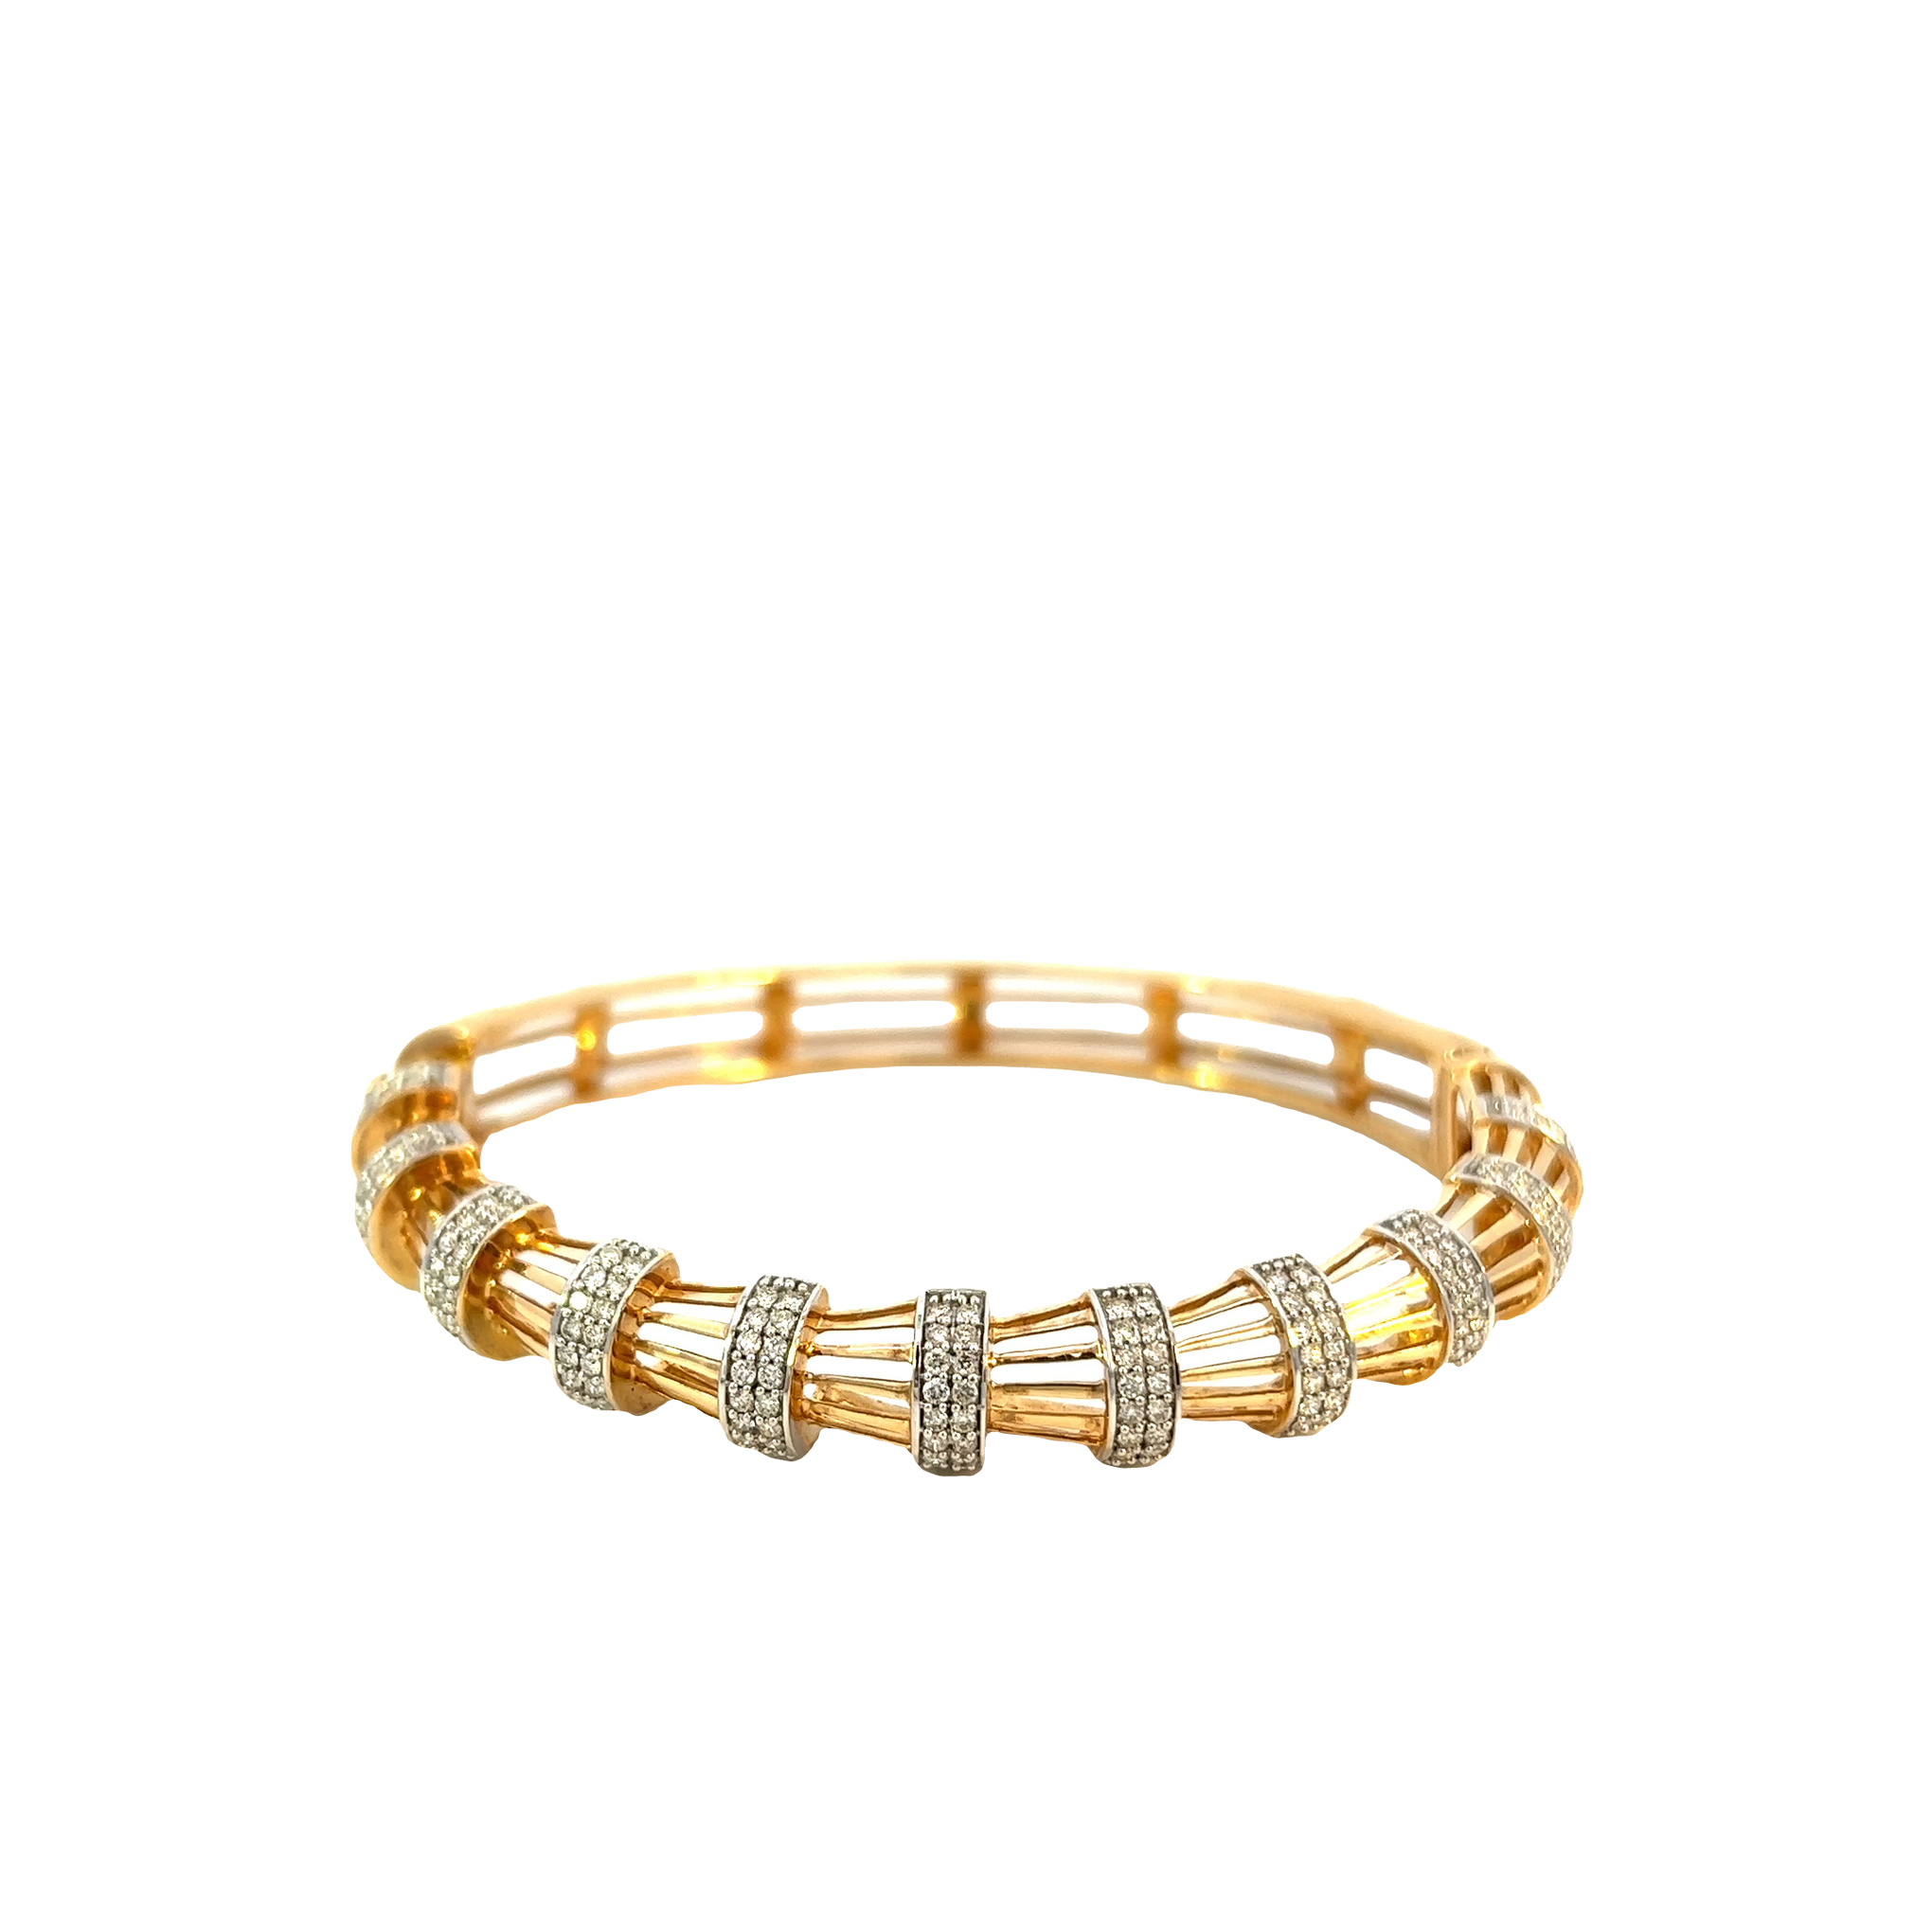 14KT YELLOW GOLD WITH ROUND CUT DIAMONDS FLUTED DESIGN BANGLE.